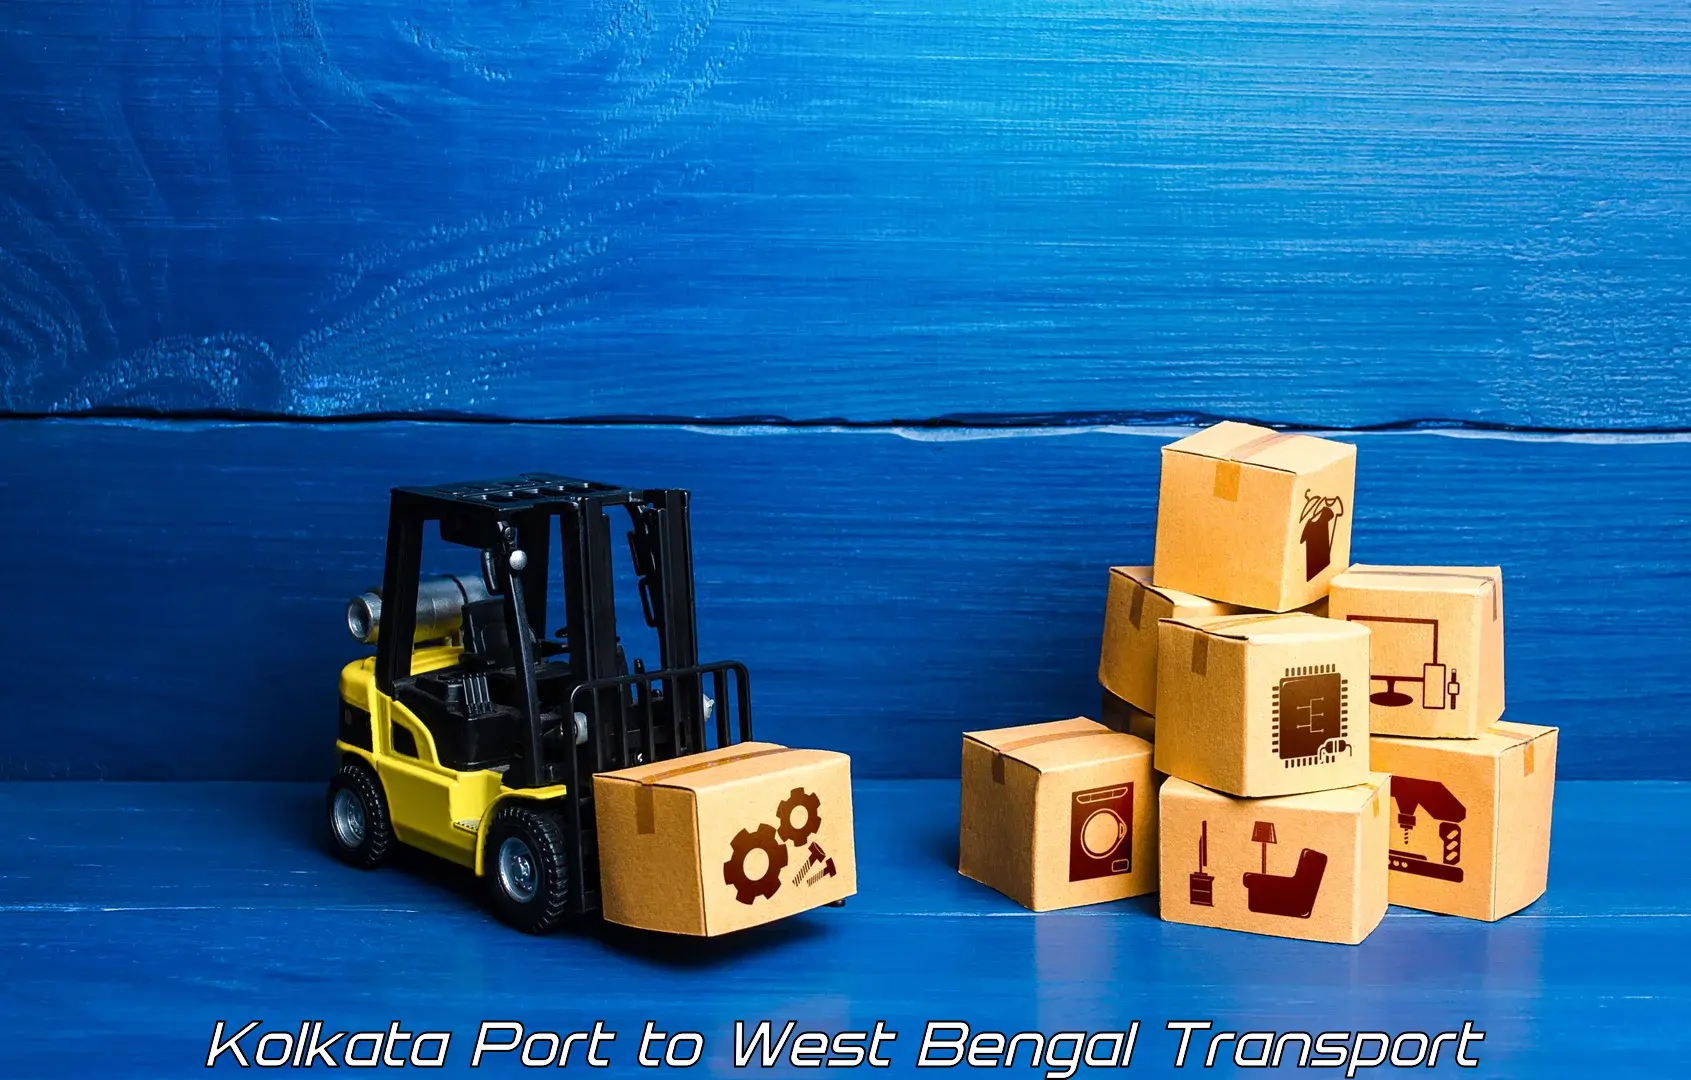 Sending bike to another city in Kolkata Port to Canning